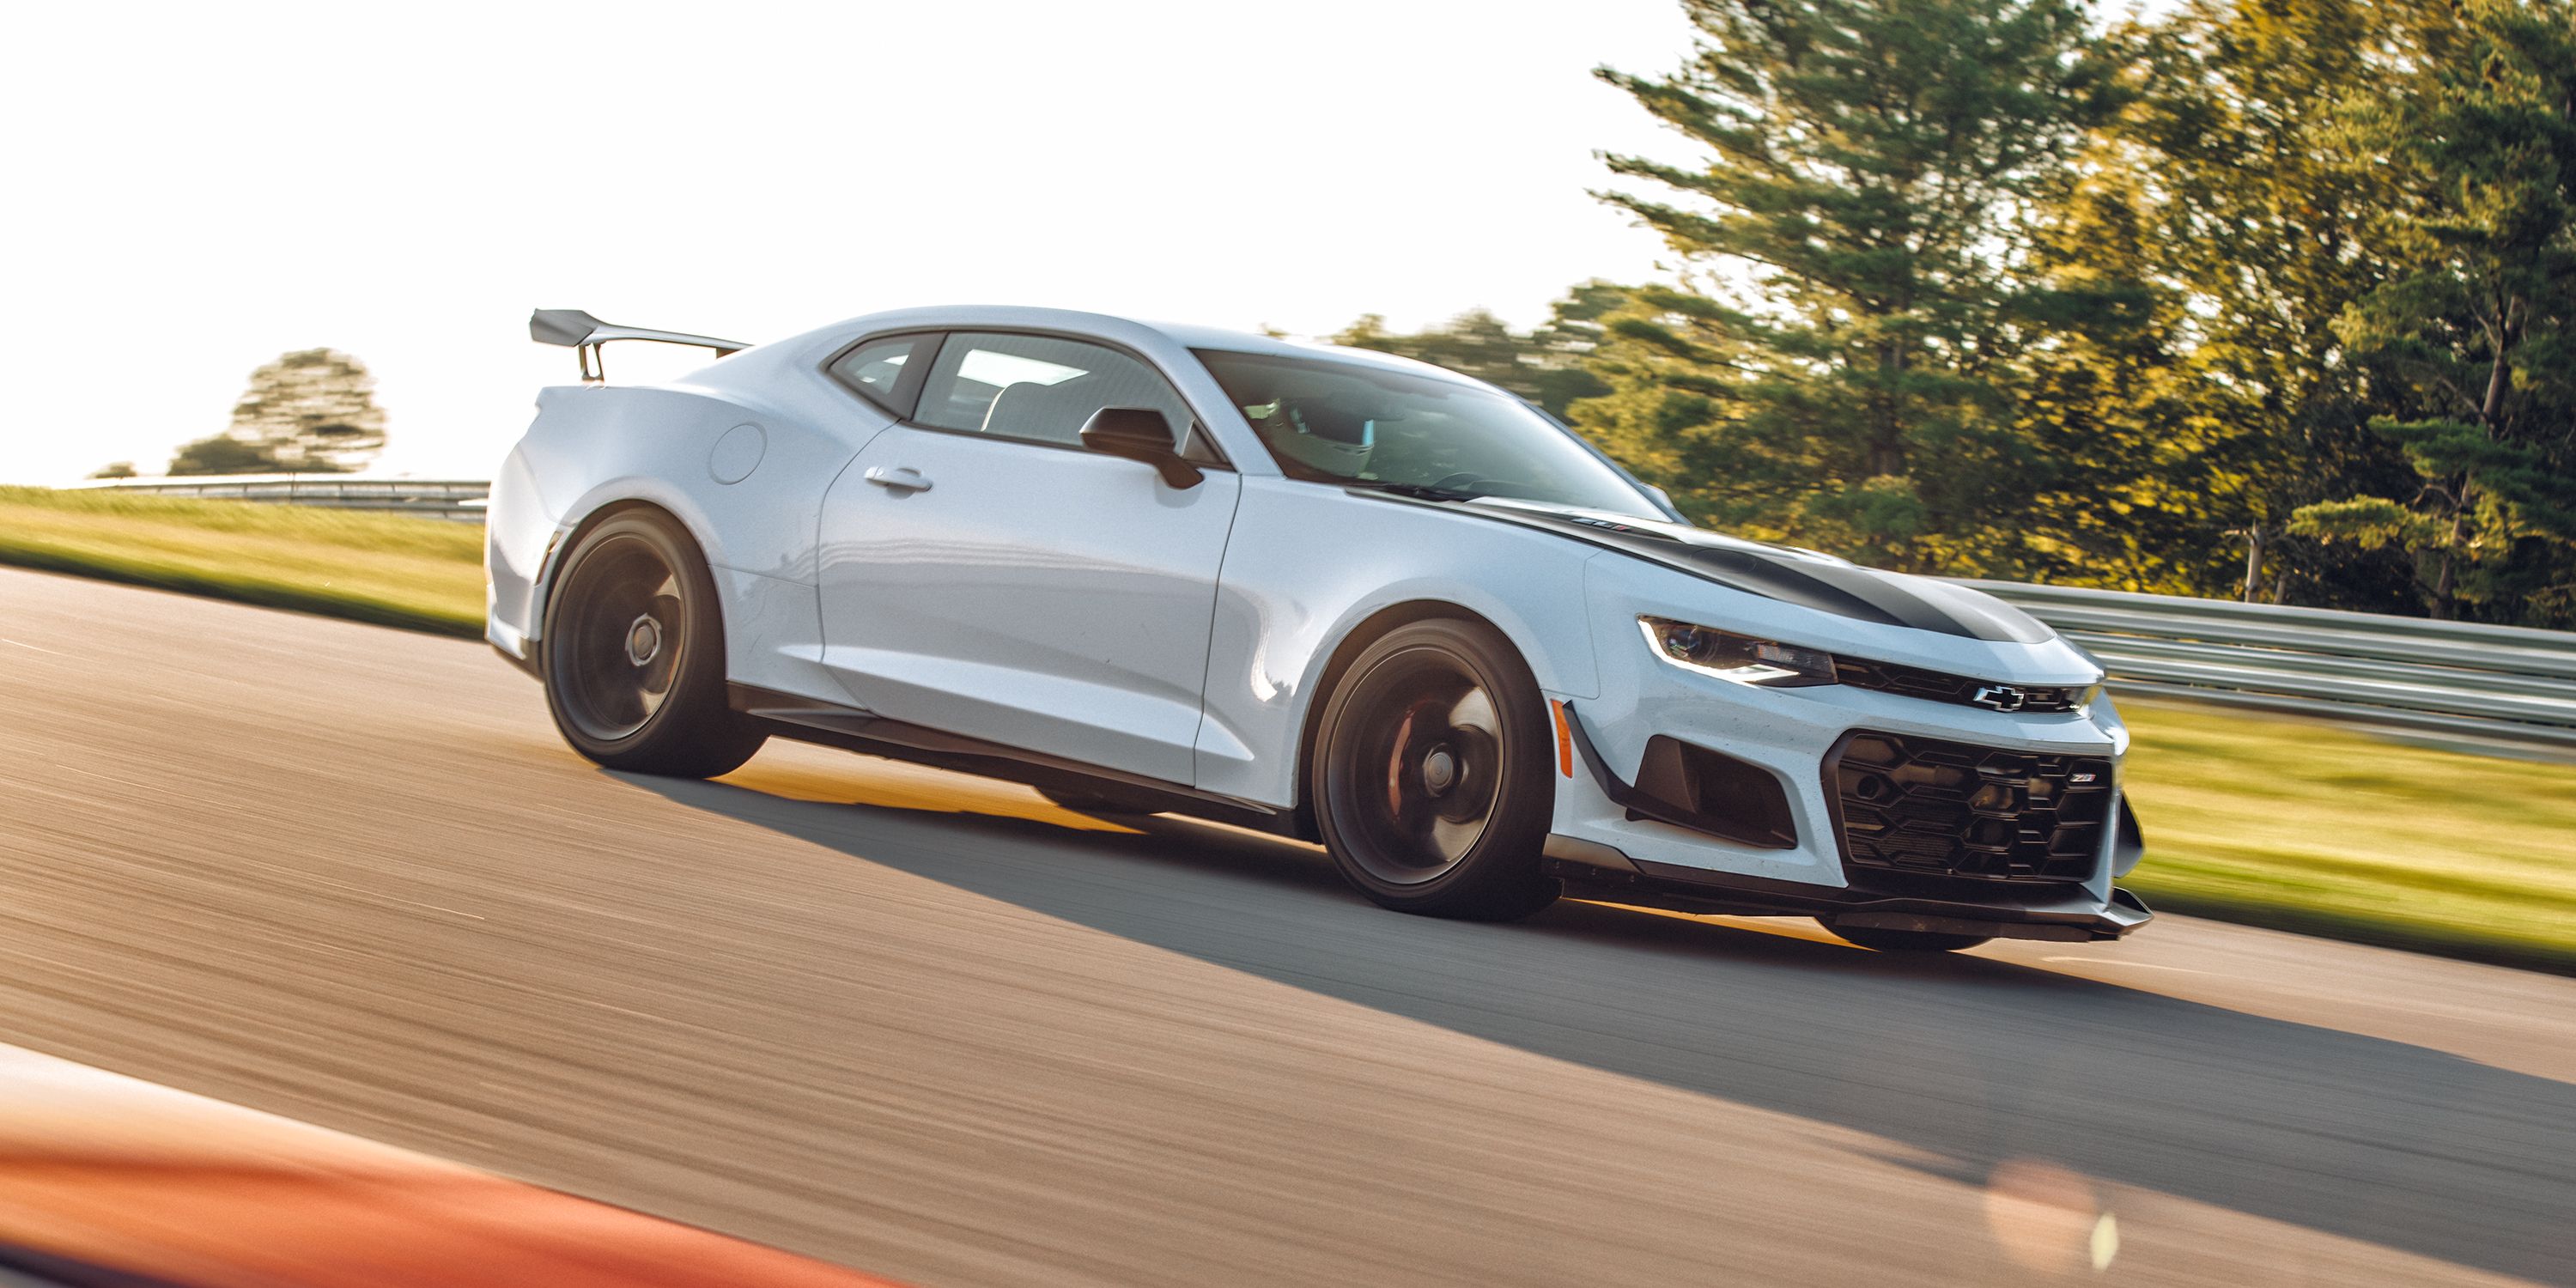 Chevrolet's Camaro SS may be world's best sport coupe